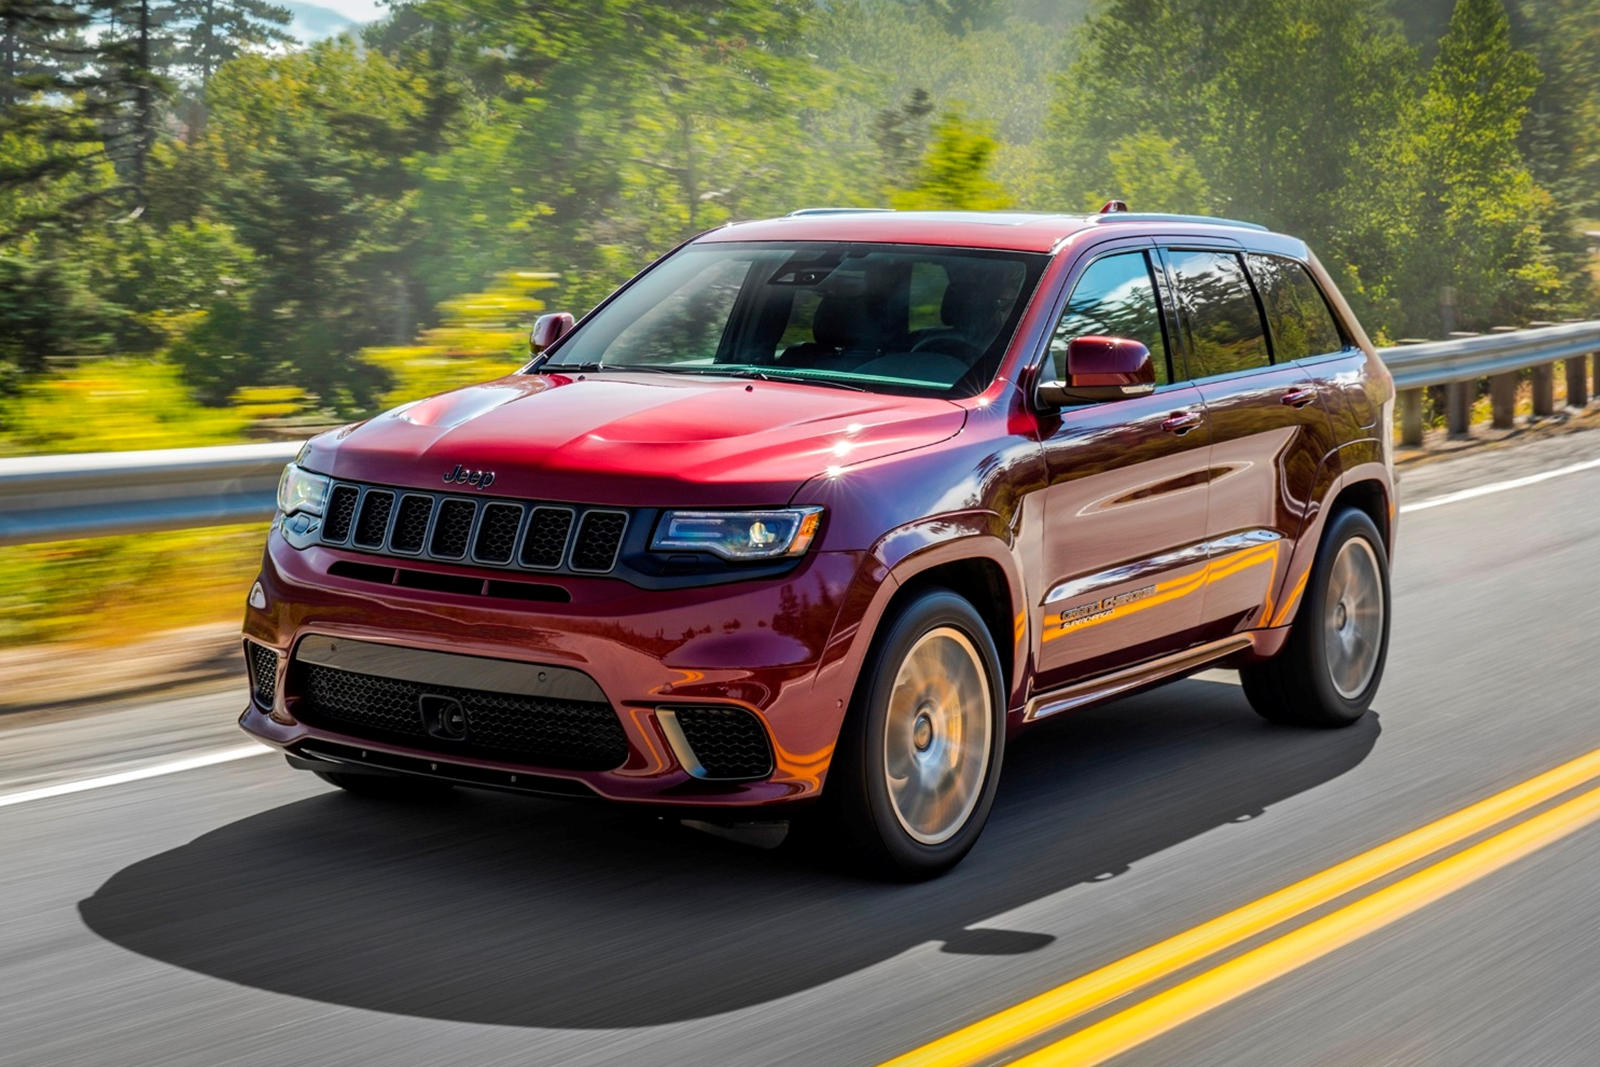 2021 Jeep Grand Cherokee S Cabin Will Be Massively Improved